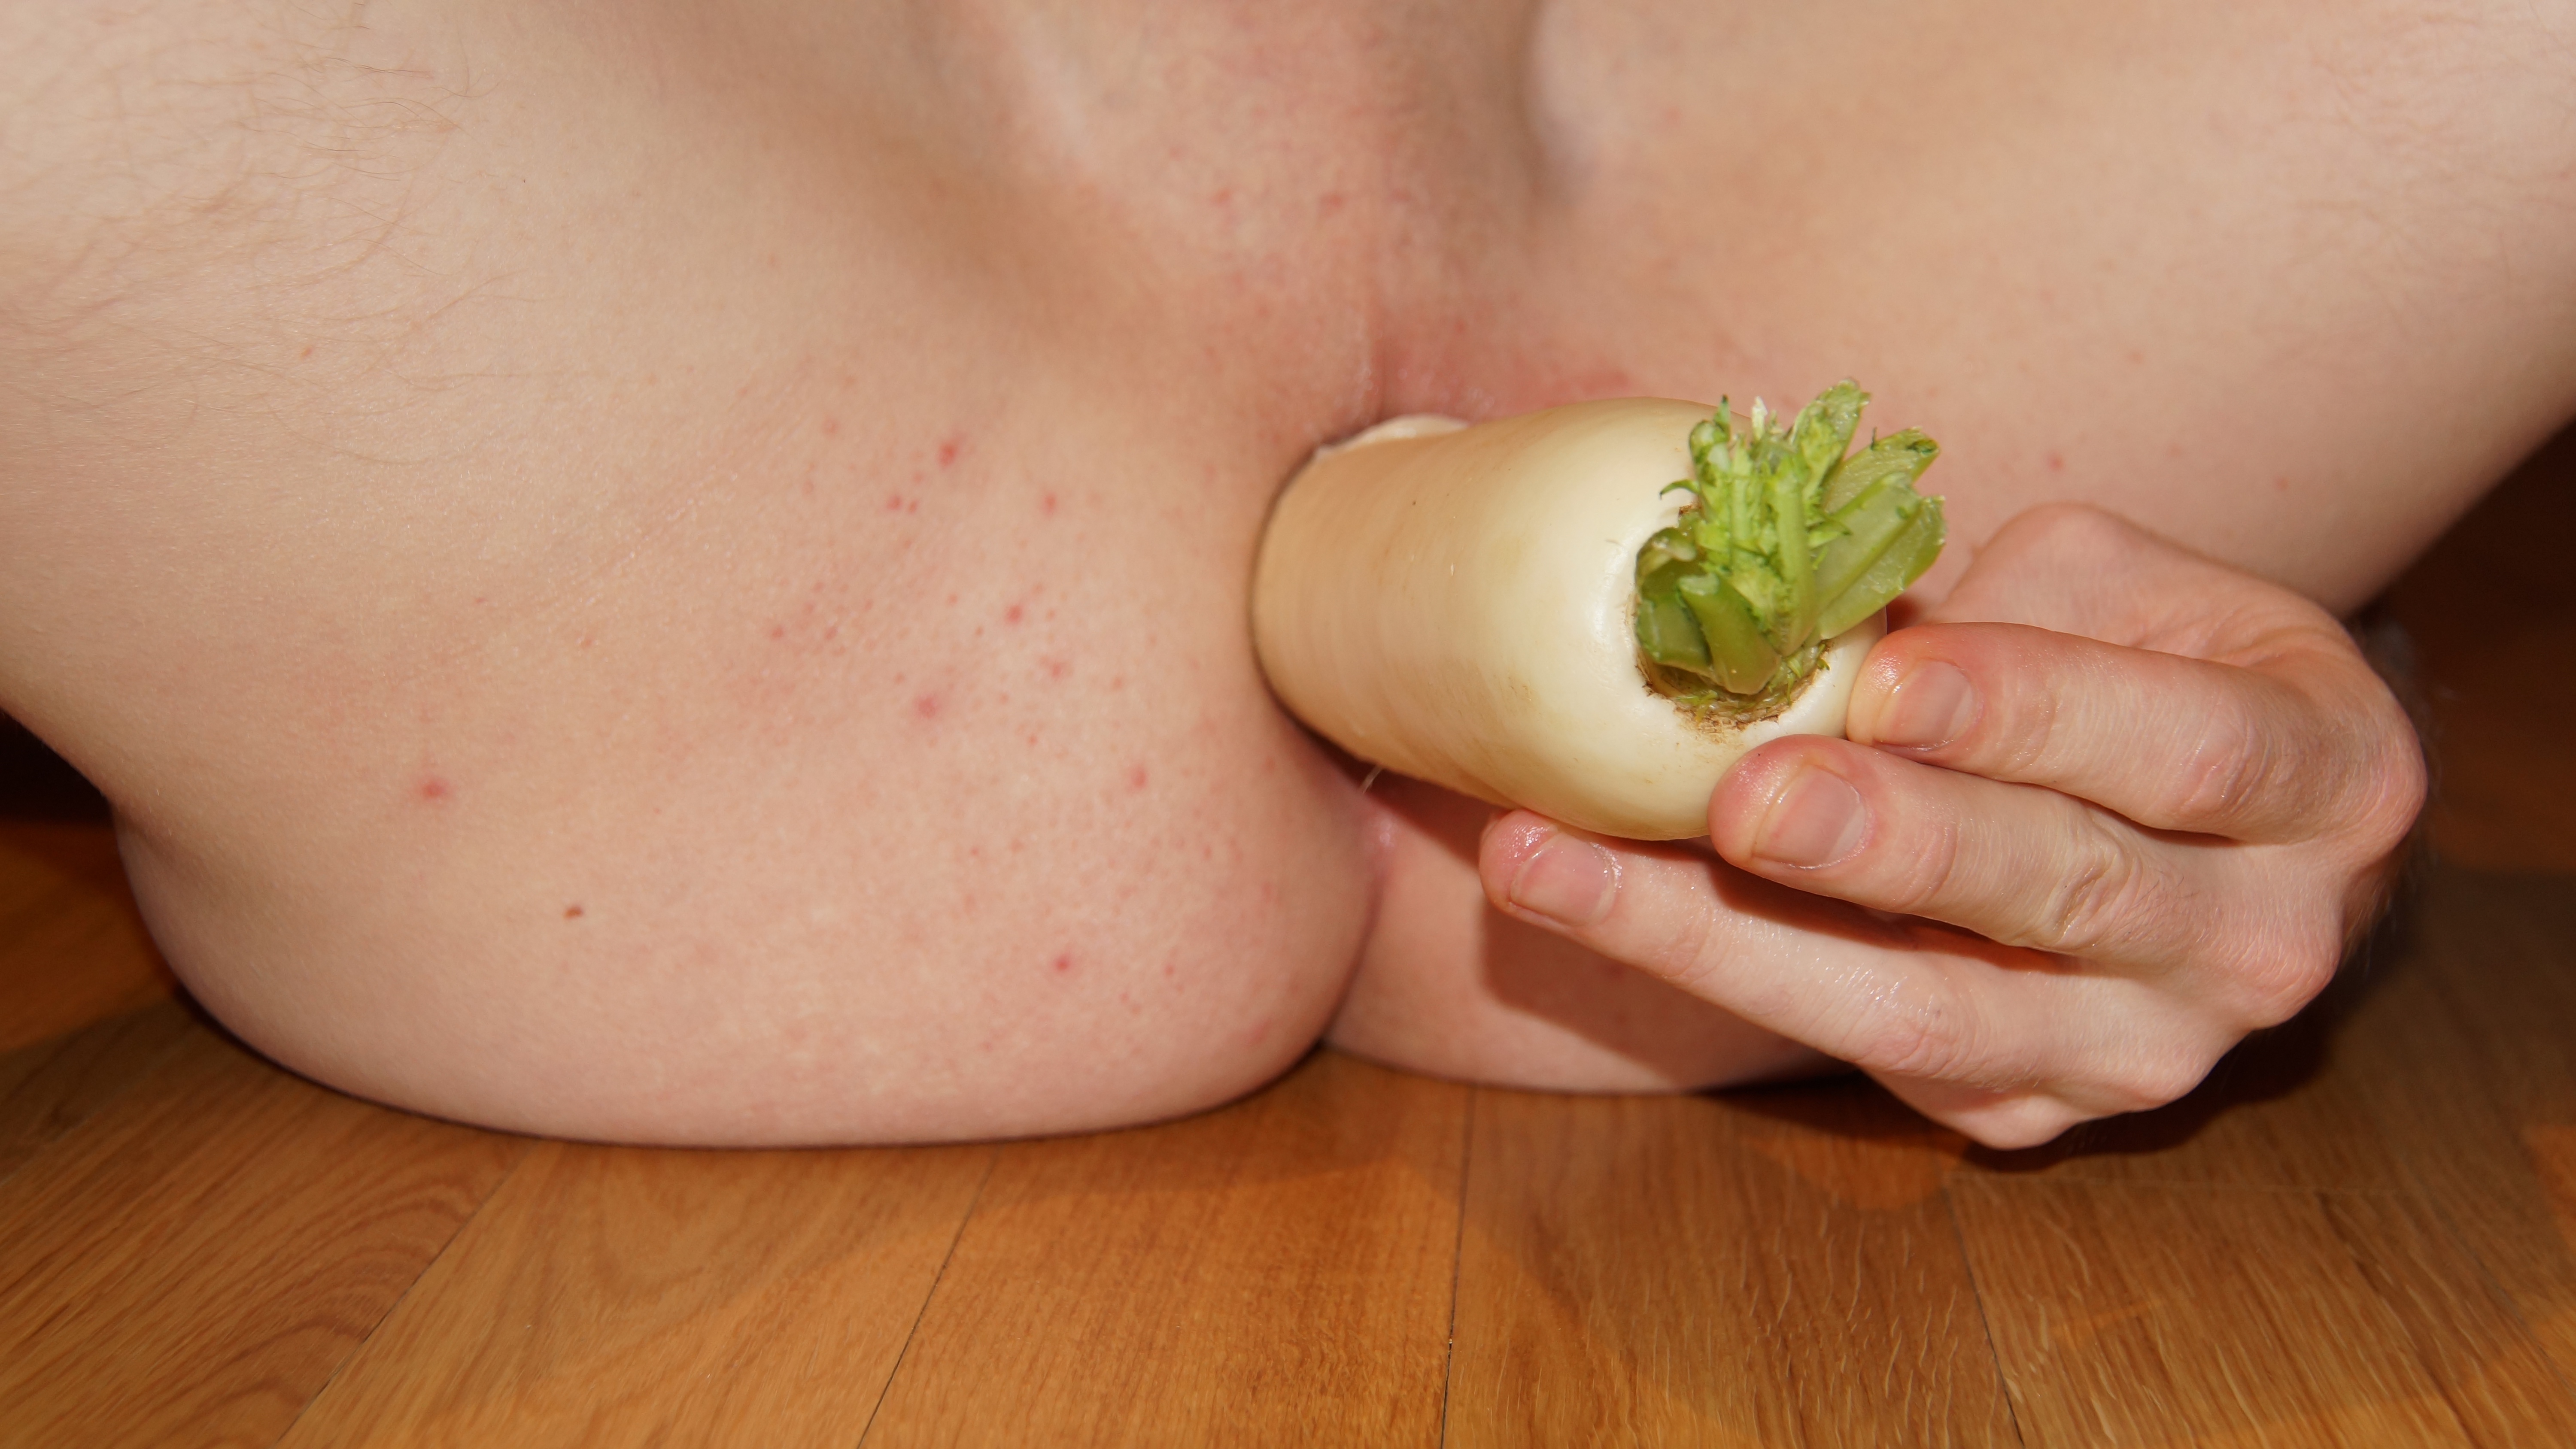 A radish in his ass